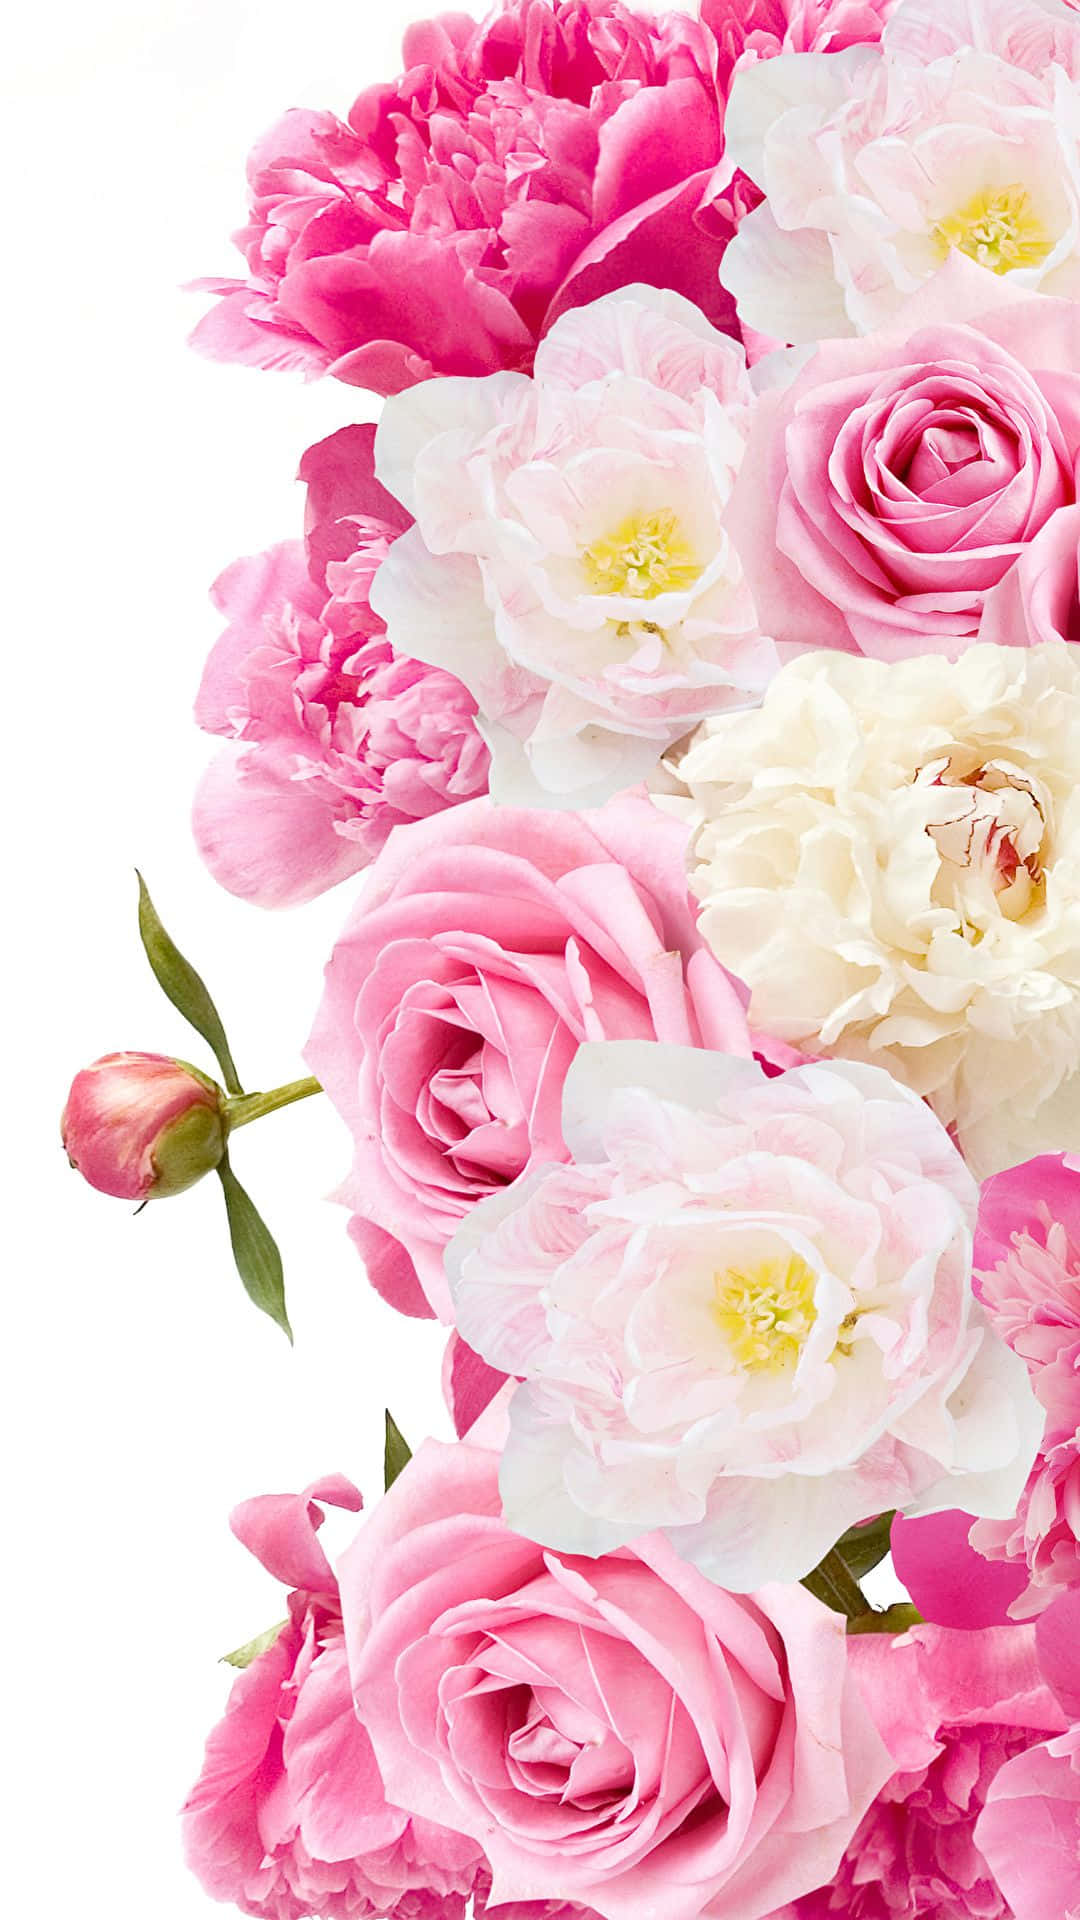 Admire the beauty of a pink peony on your iPhone Wallpaper